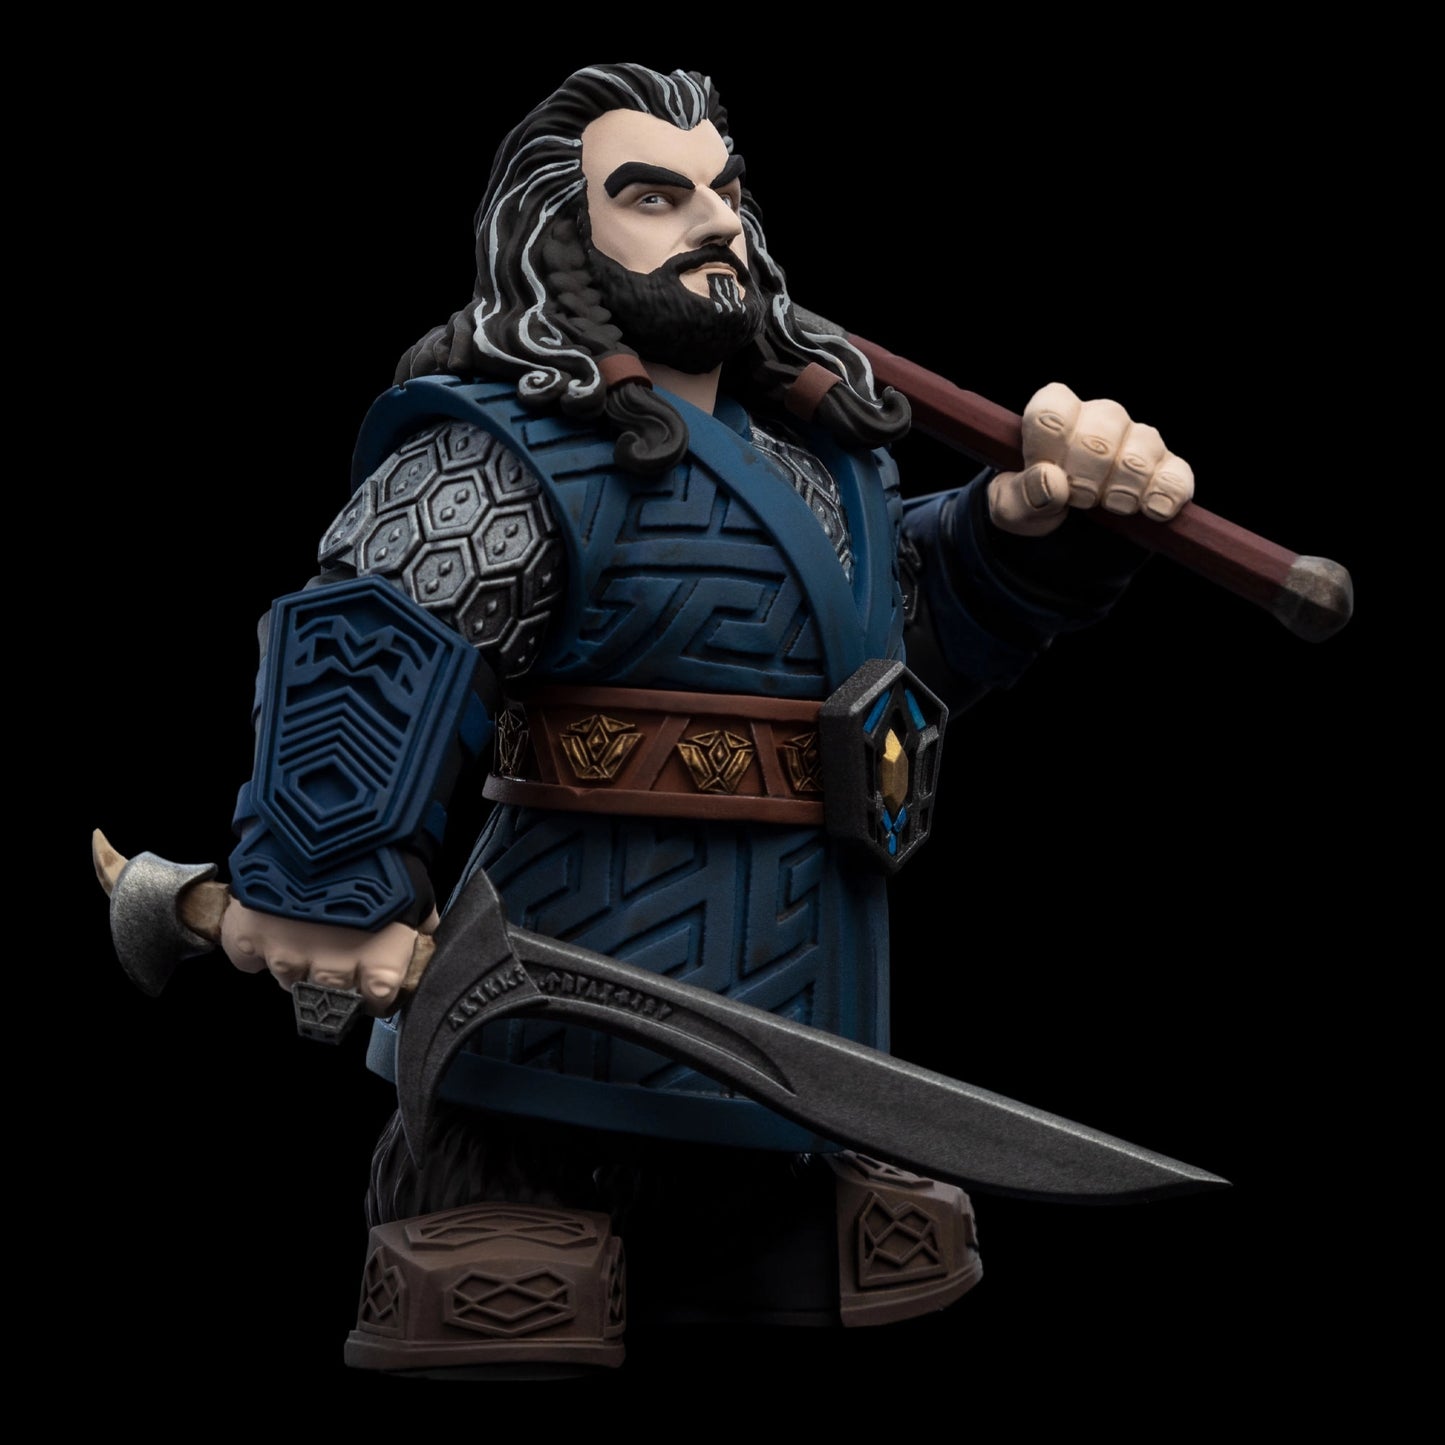 Thorin Oakenshield (The Hobbit) Limited Edition Axe Mini Epics Statue by Weta Workshop